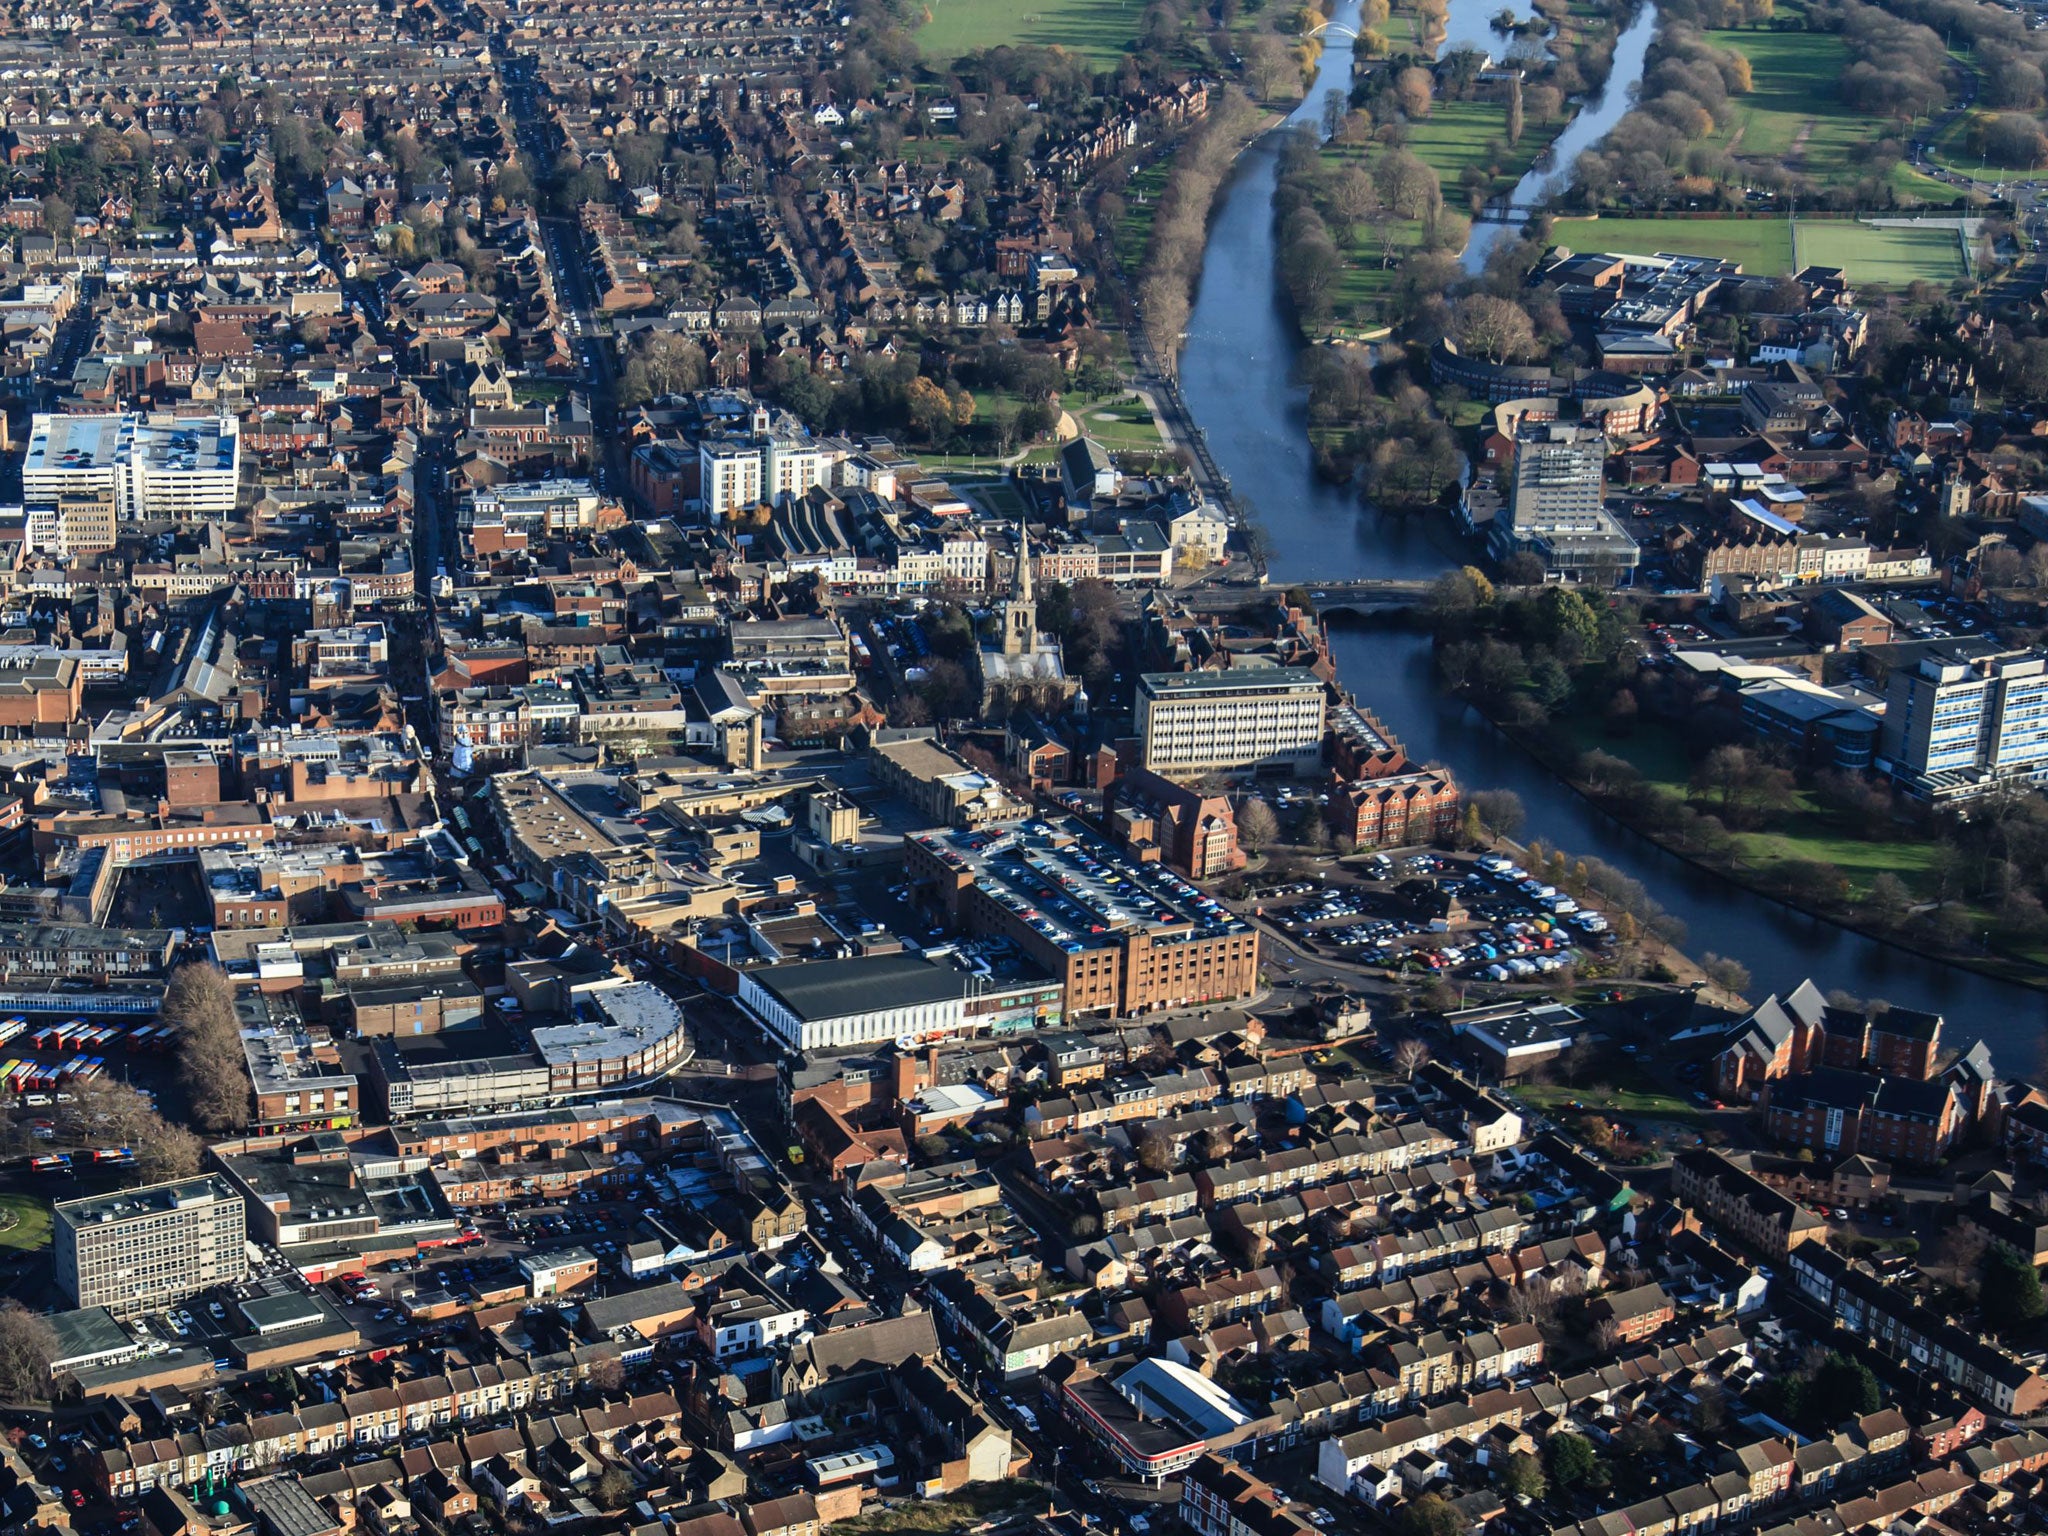 An aerial view of the Bedfordshire town